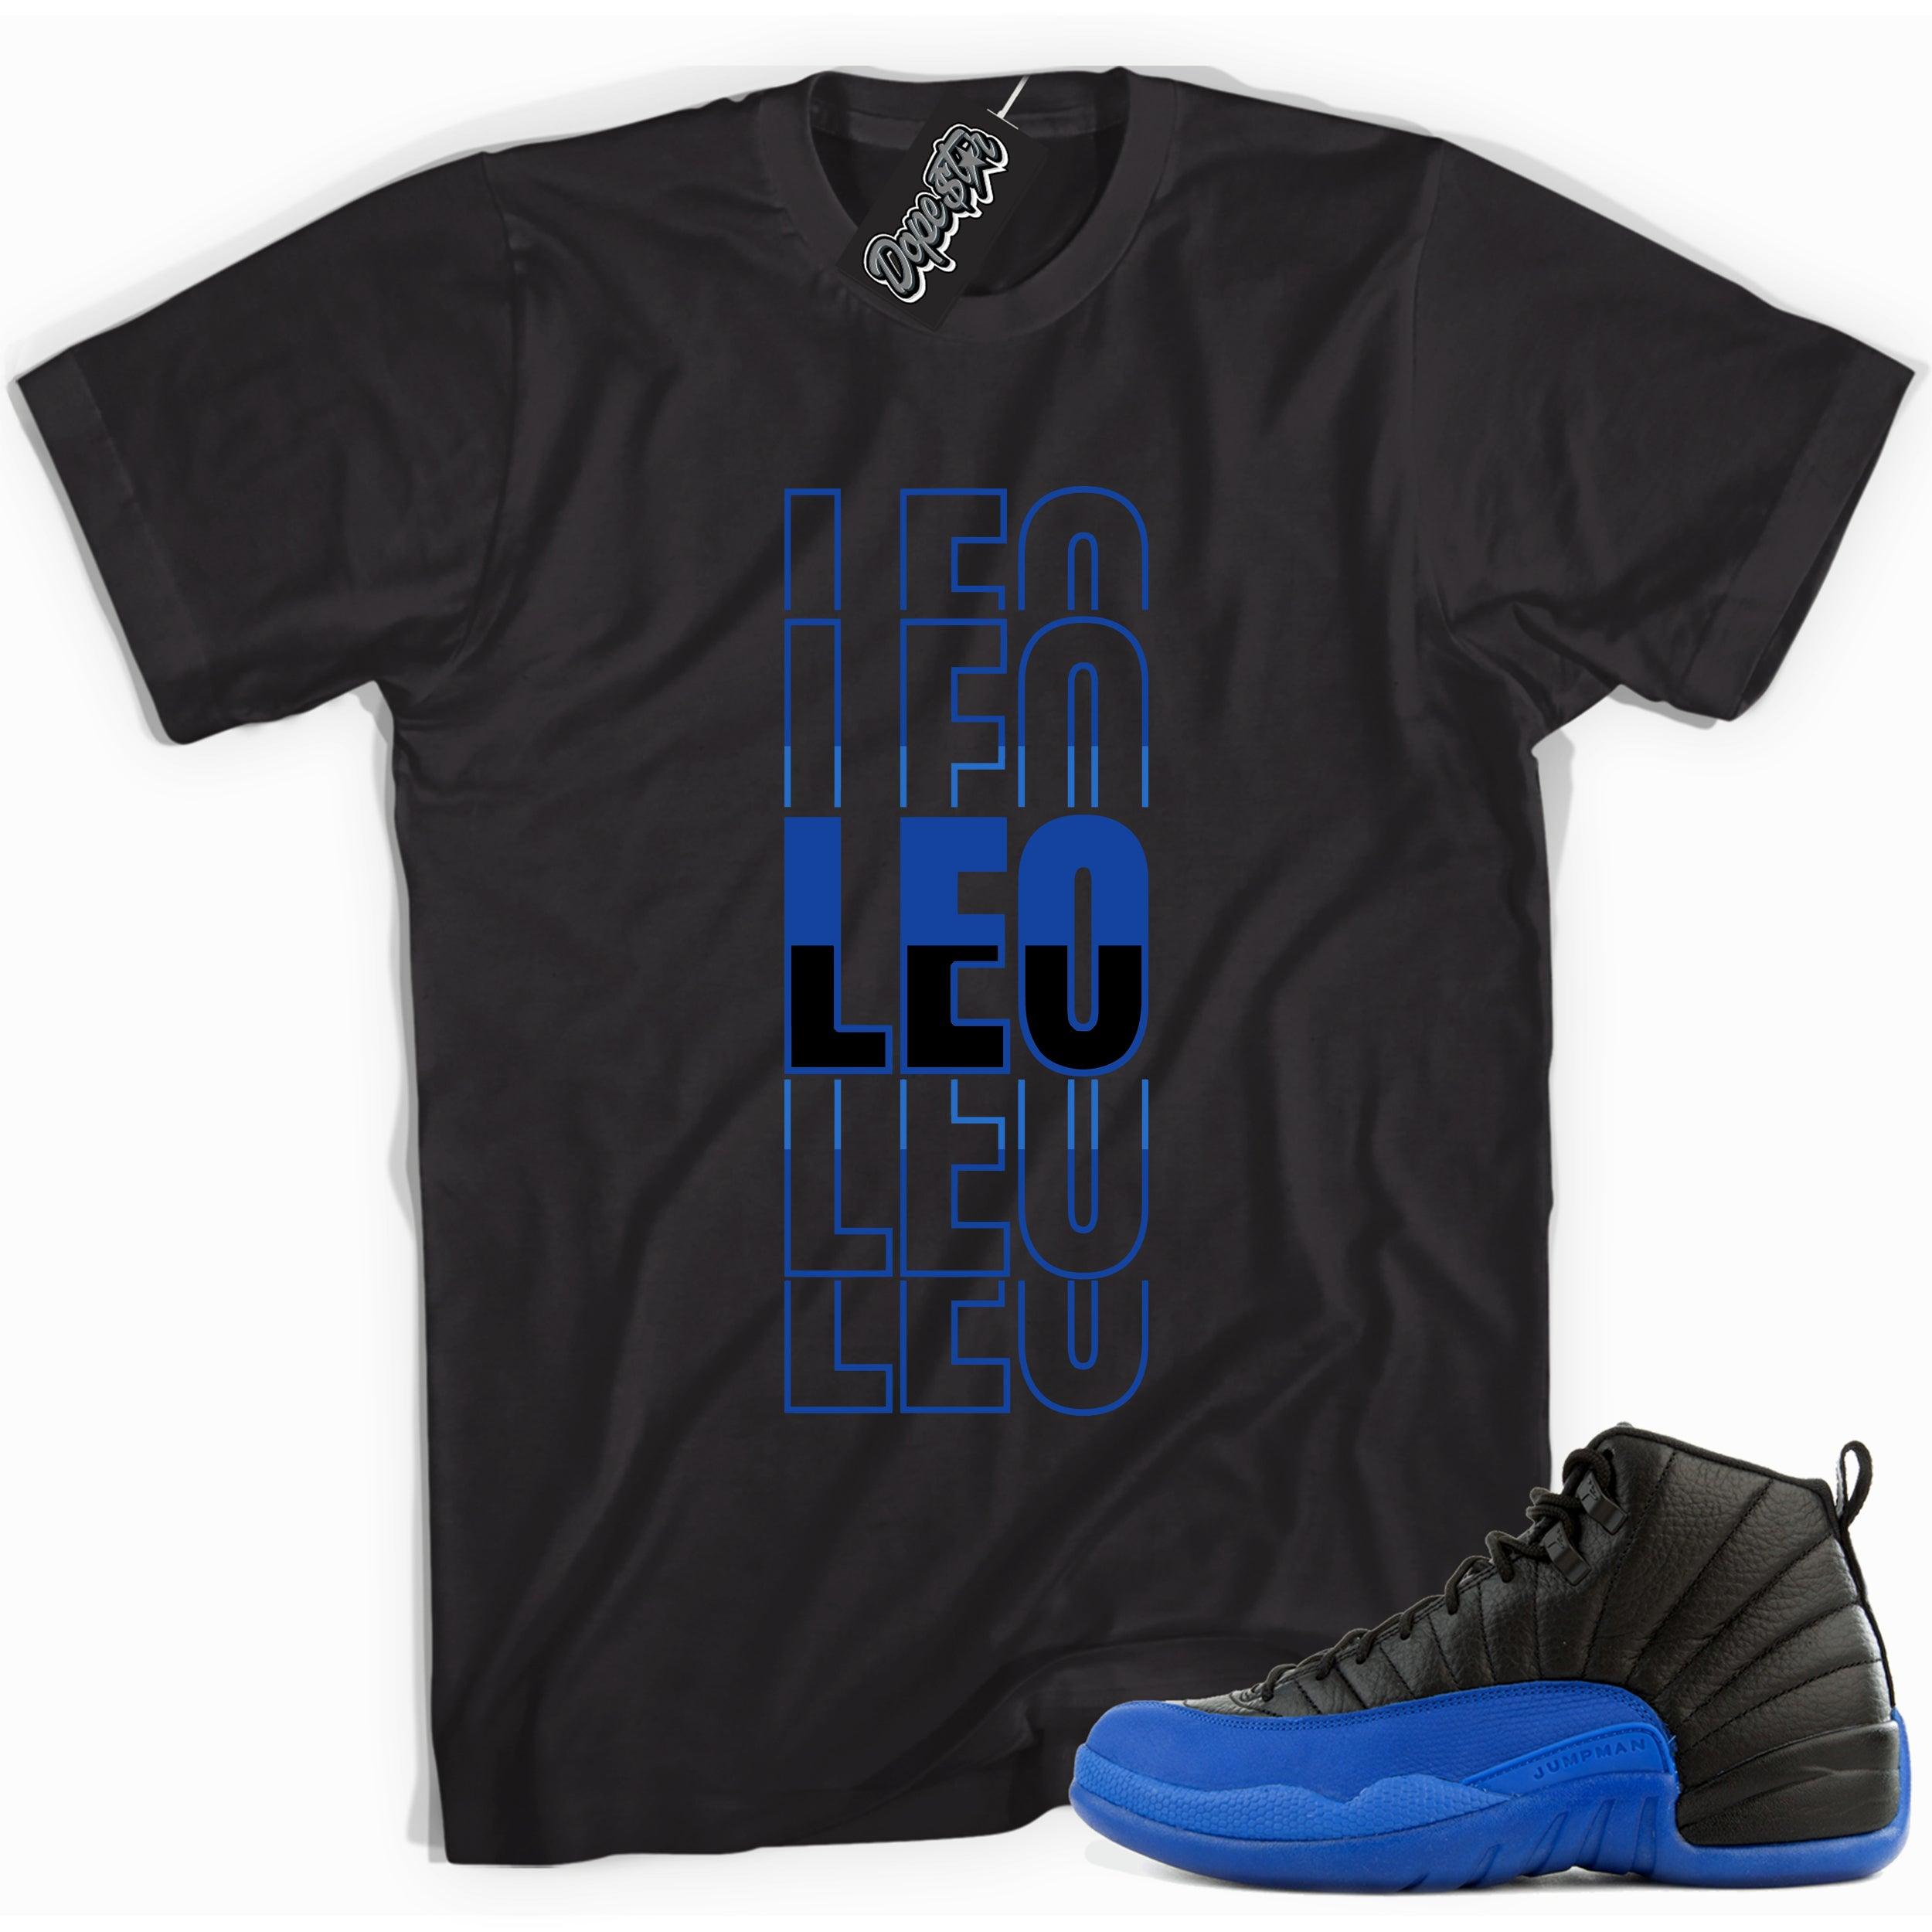 Cool black graphic tee with 'leo' print, that perfectly matches  Air Jordan 12 Retro Black Game Royal sneakers.